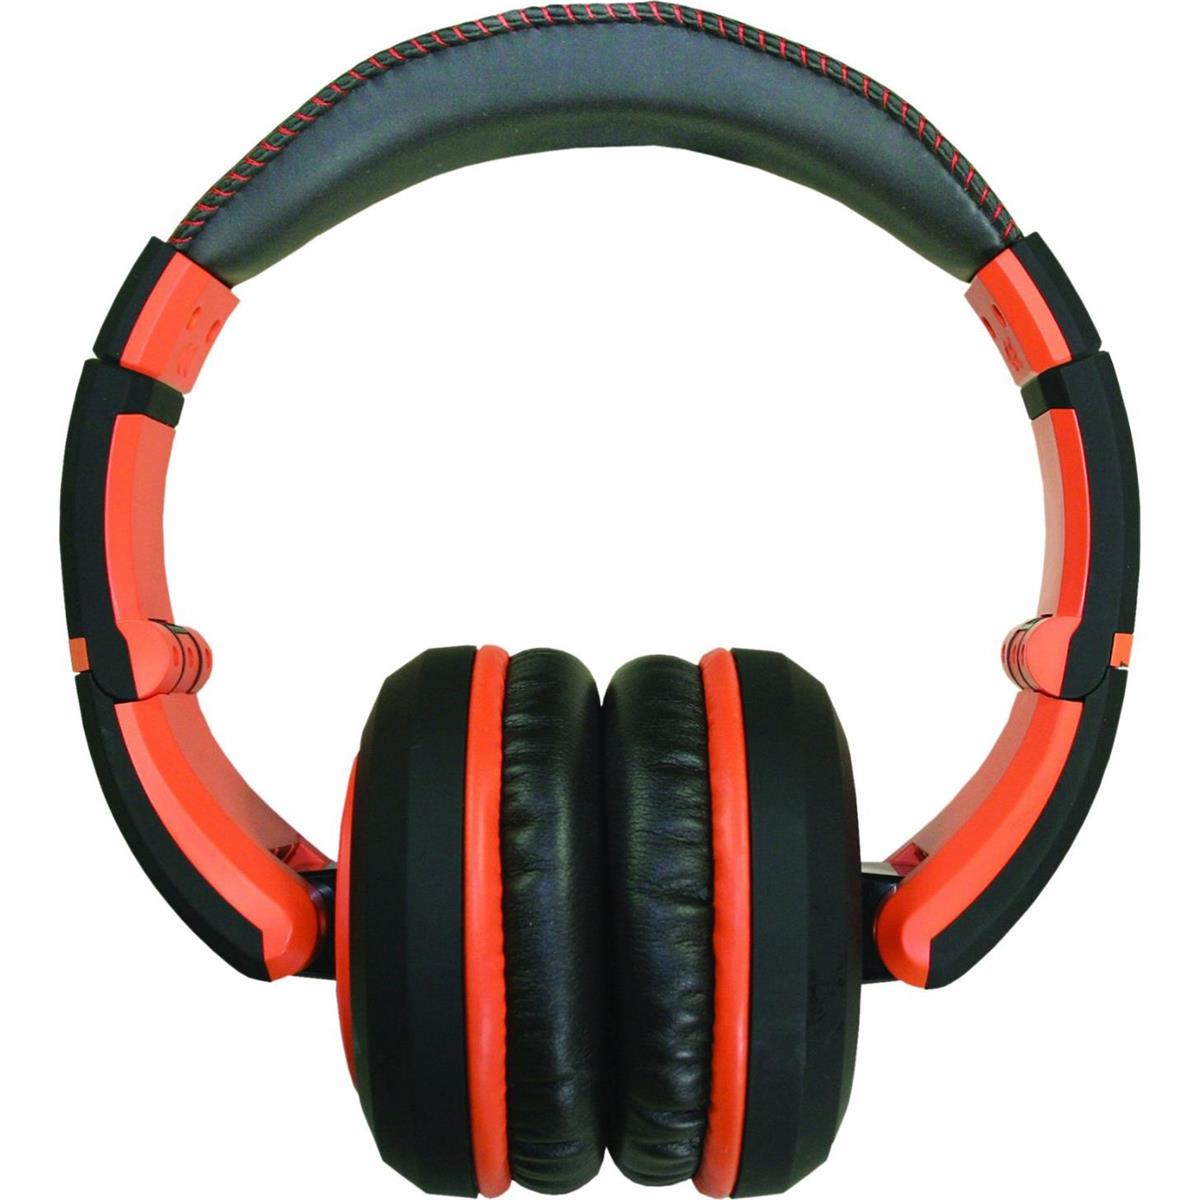 Image of CAD Audio D Audio MH510 Personal Headphones w/Cables &amp; Earpads